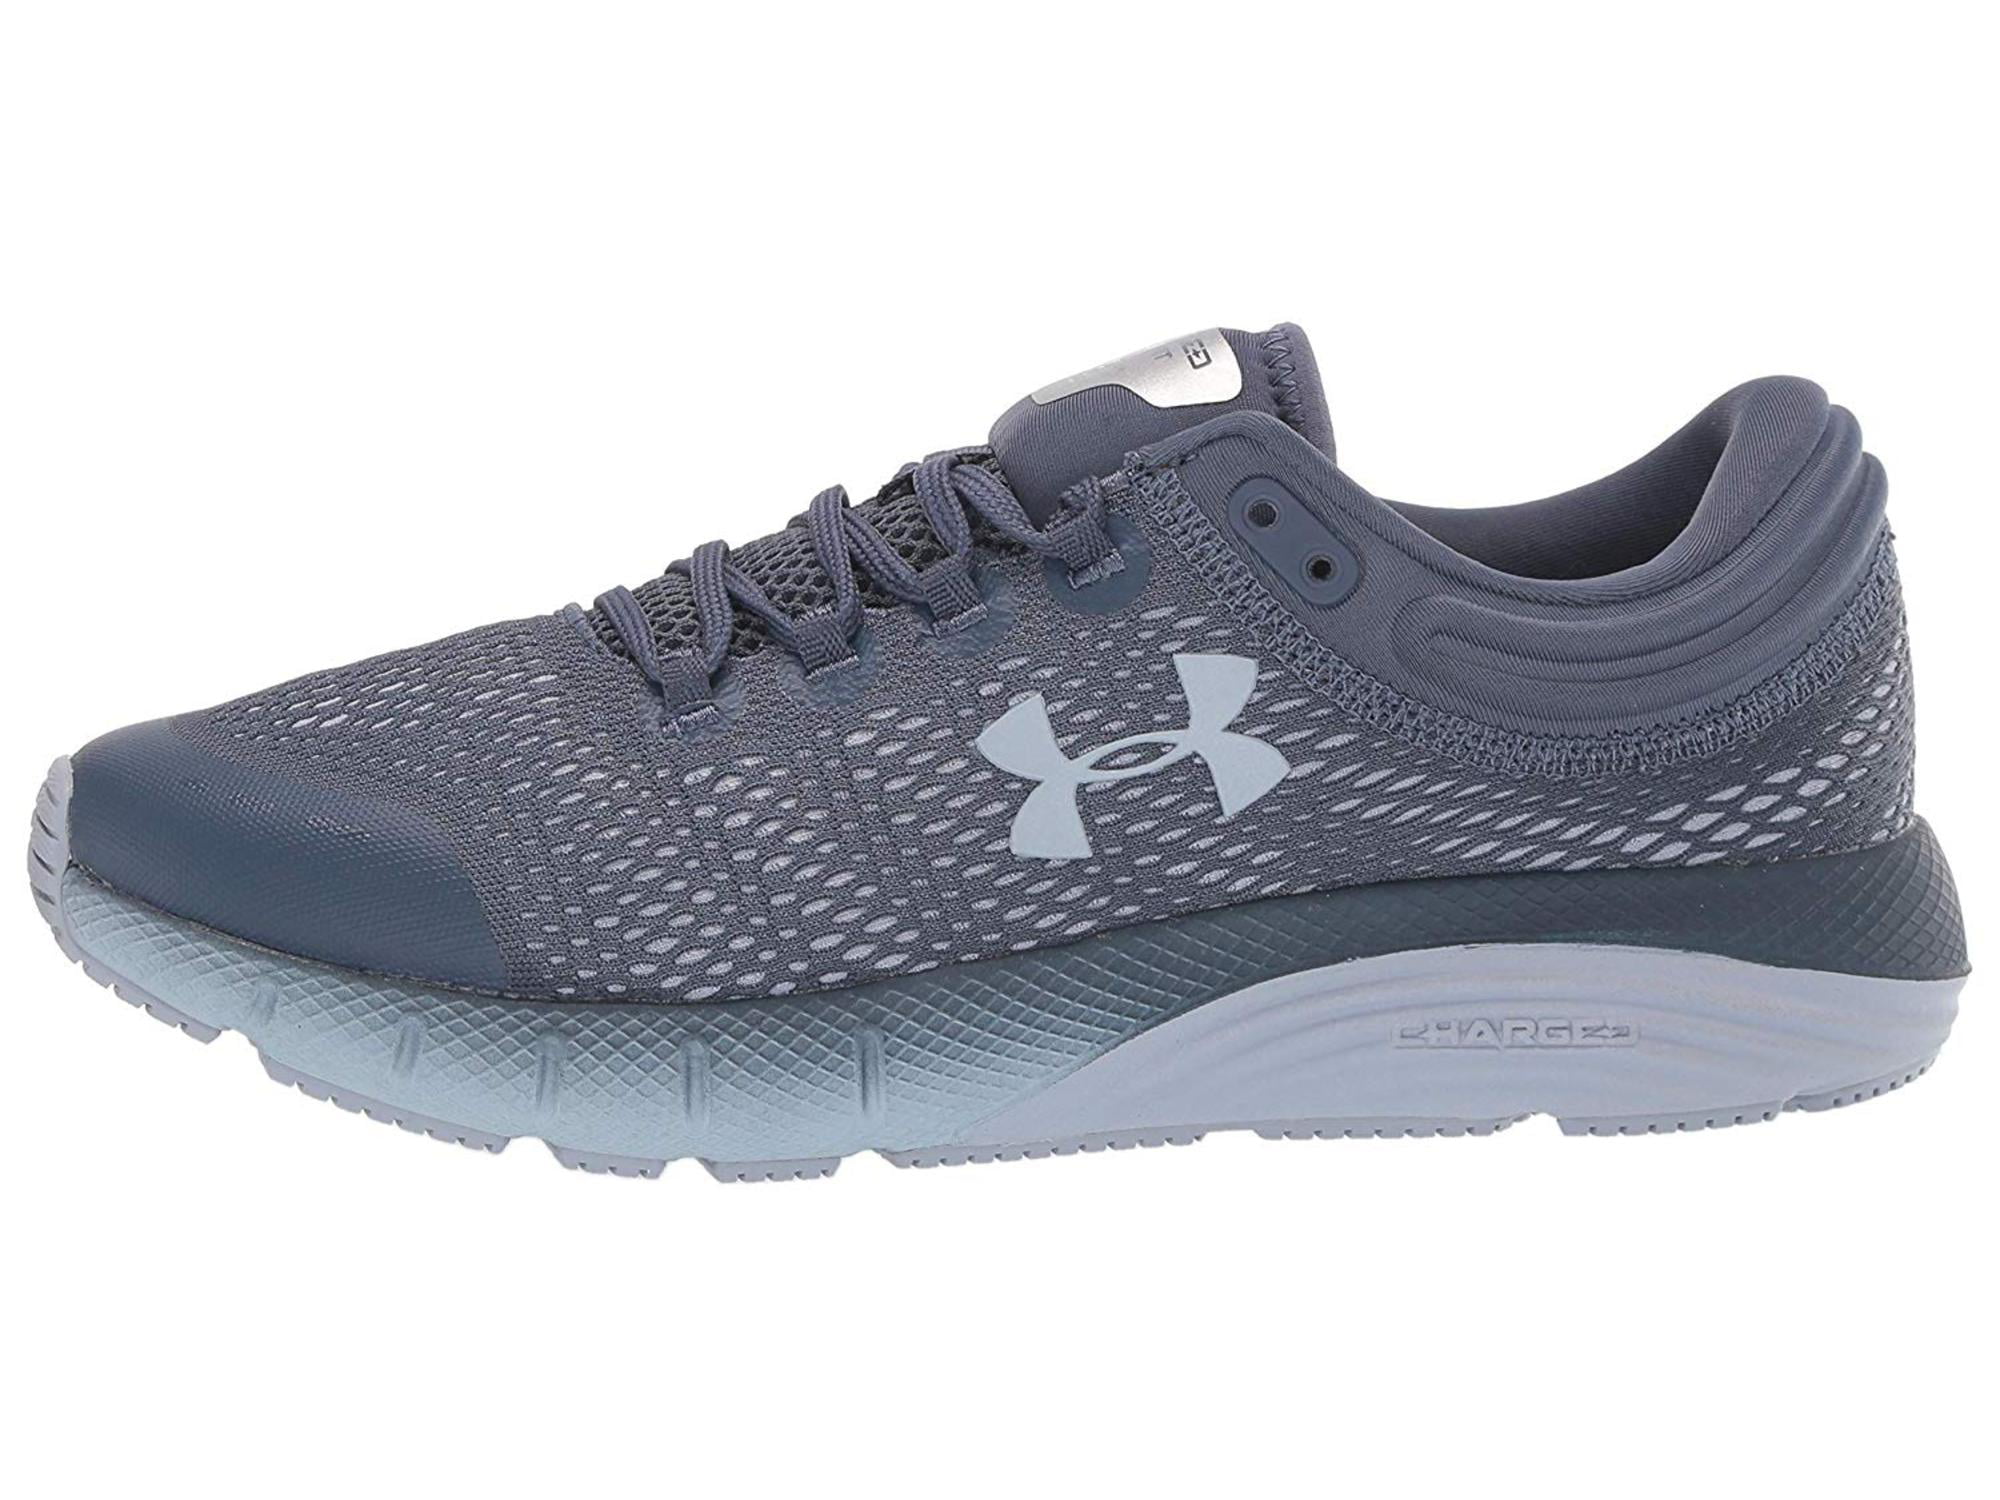 Under Armour - Under Armour Women's Charged Bandit 5 Running Shoe ...